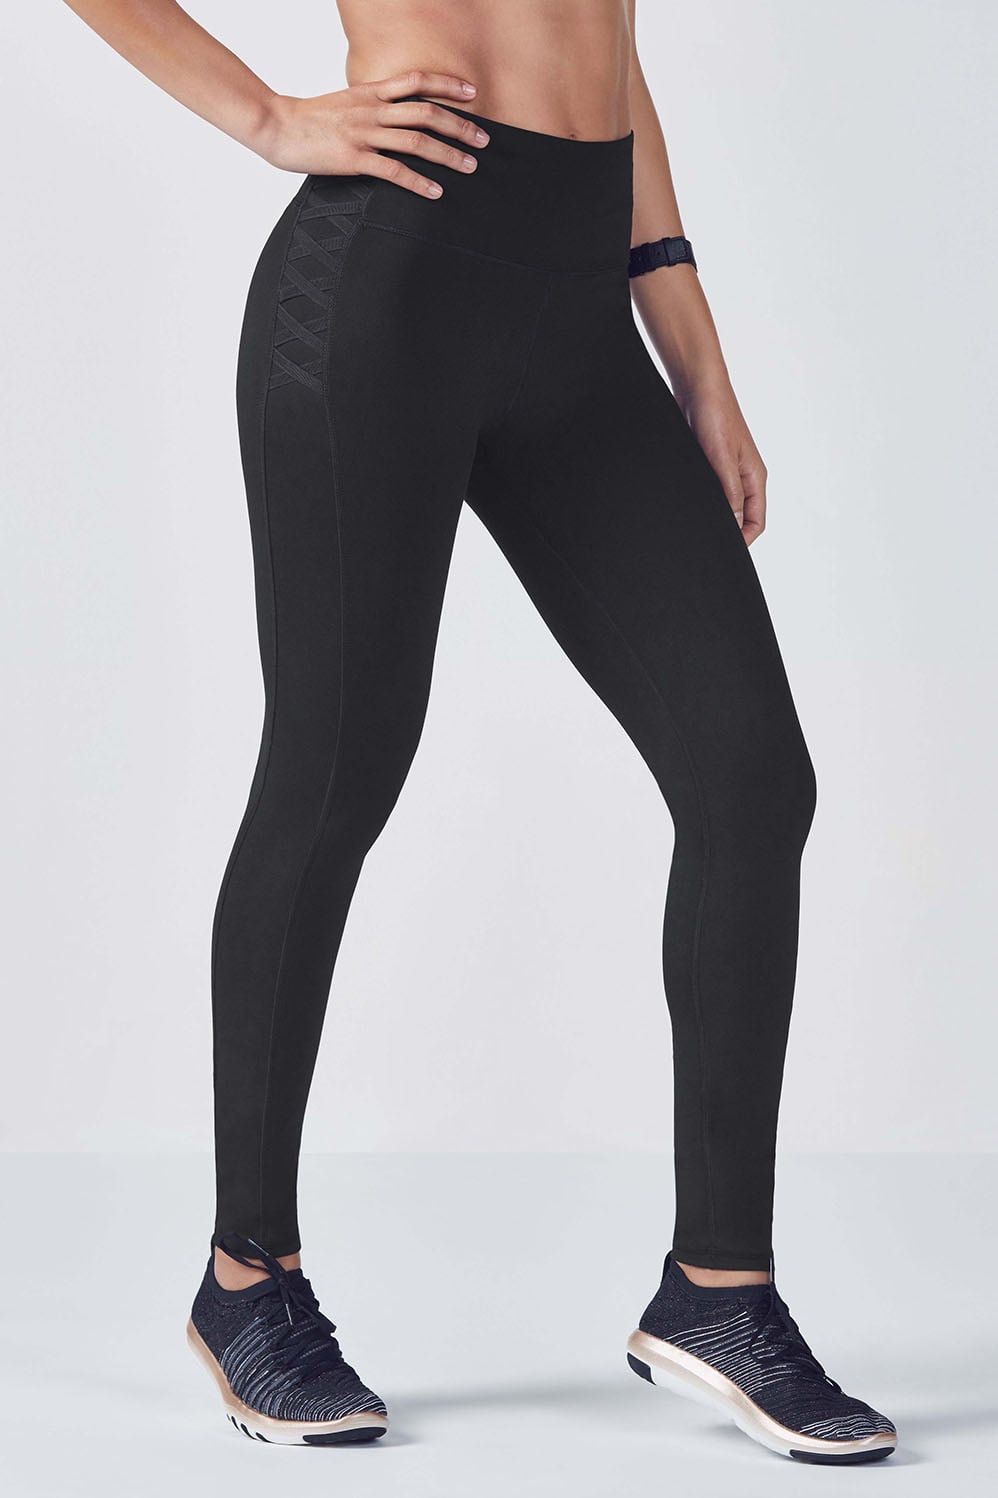 Seamless, stylish, and oh-so-comfy! @fabletics is here to keep you looking  fabulous from gym to street! 💁🏼‍♀️